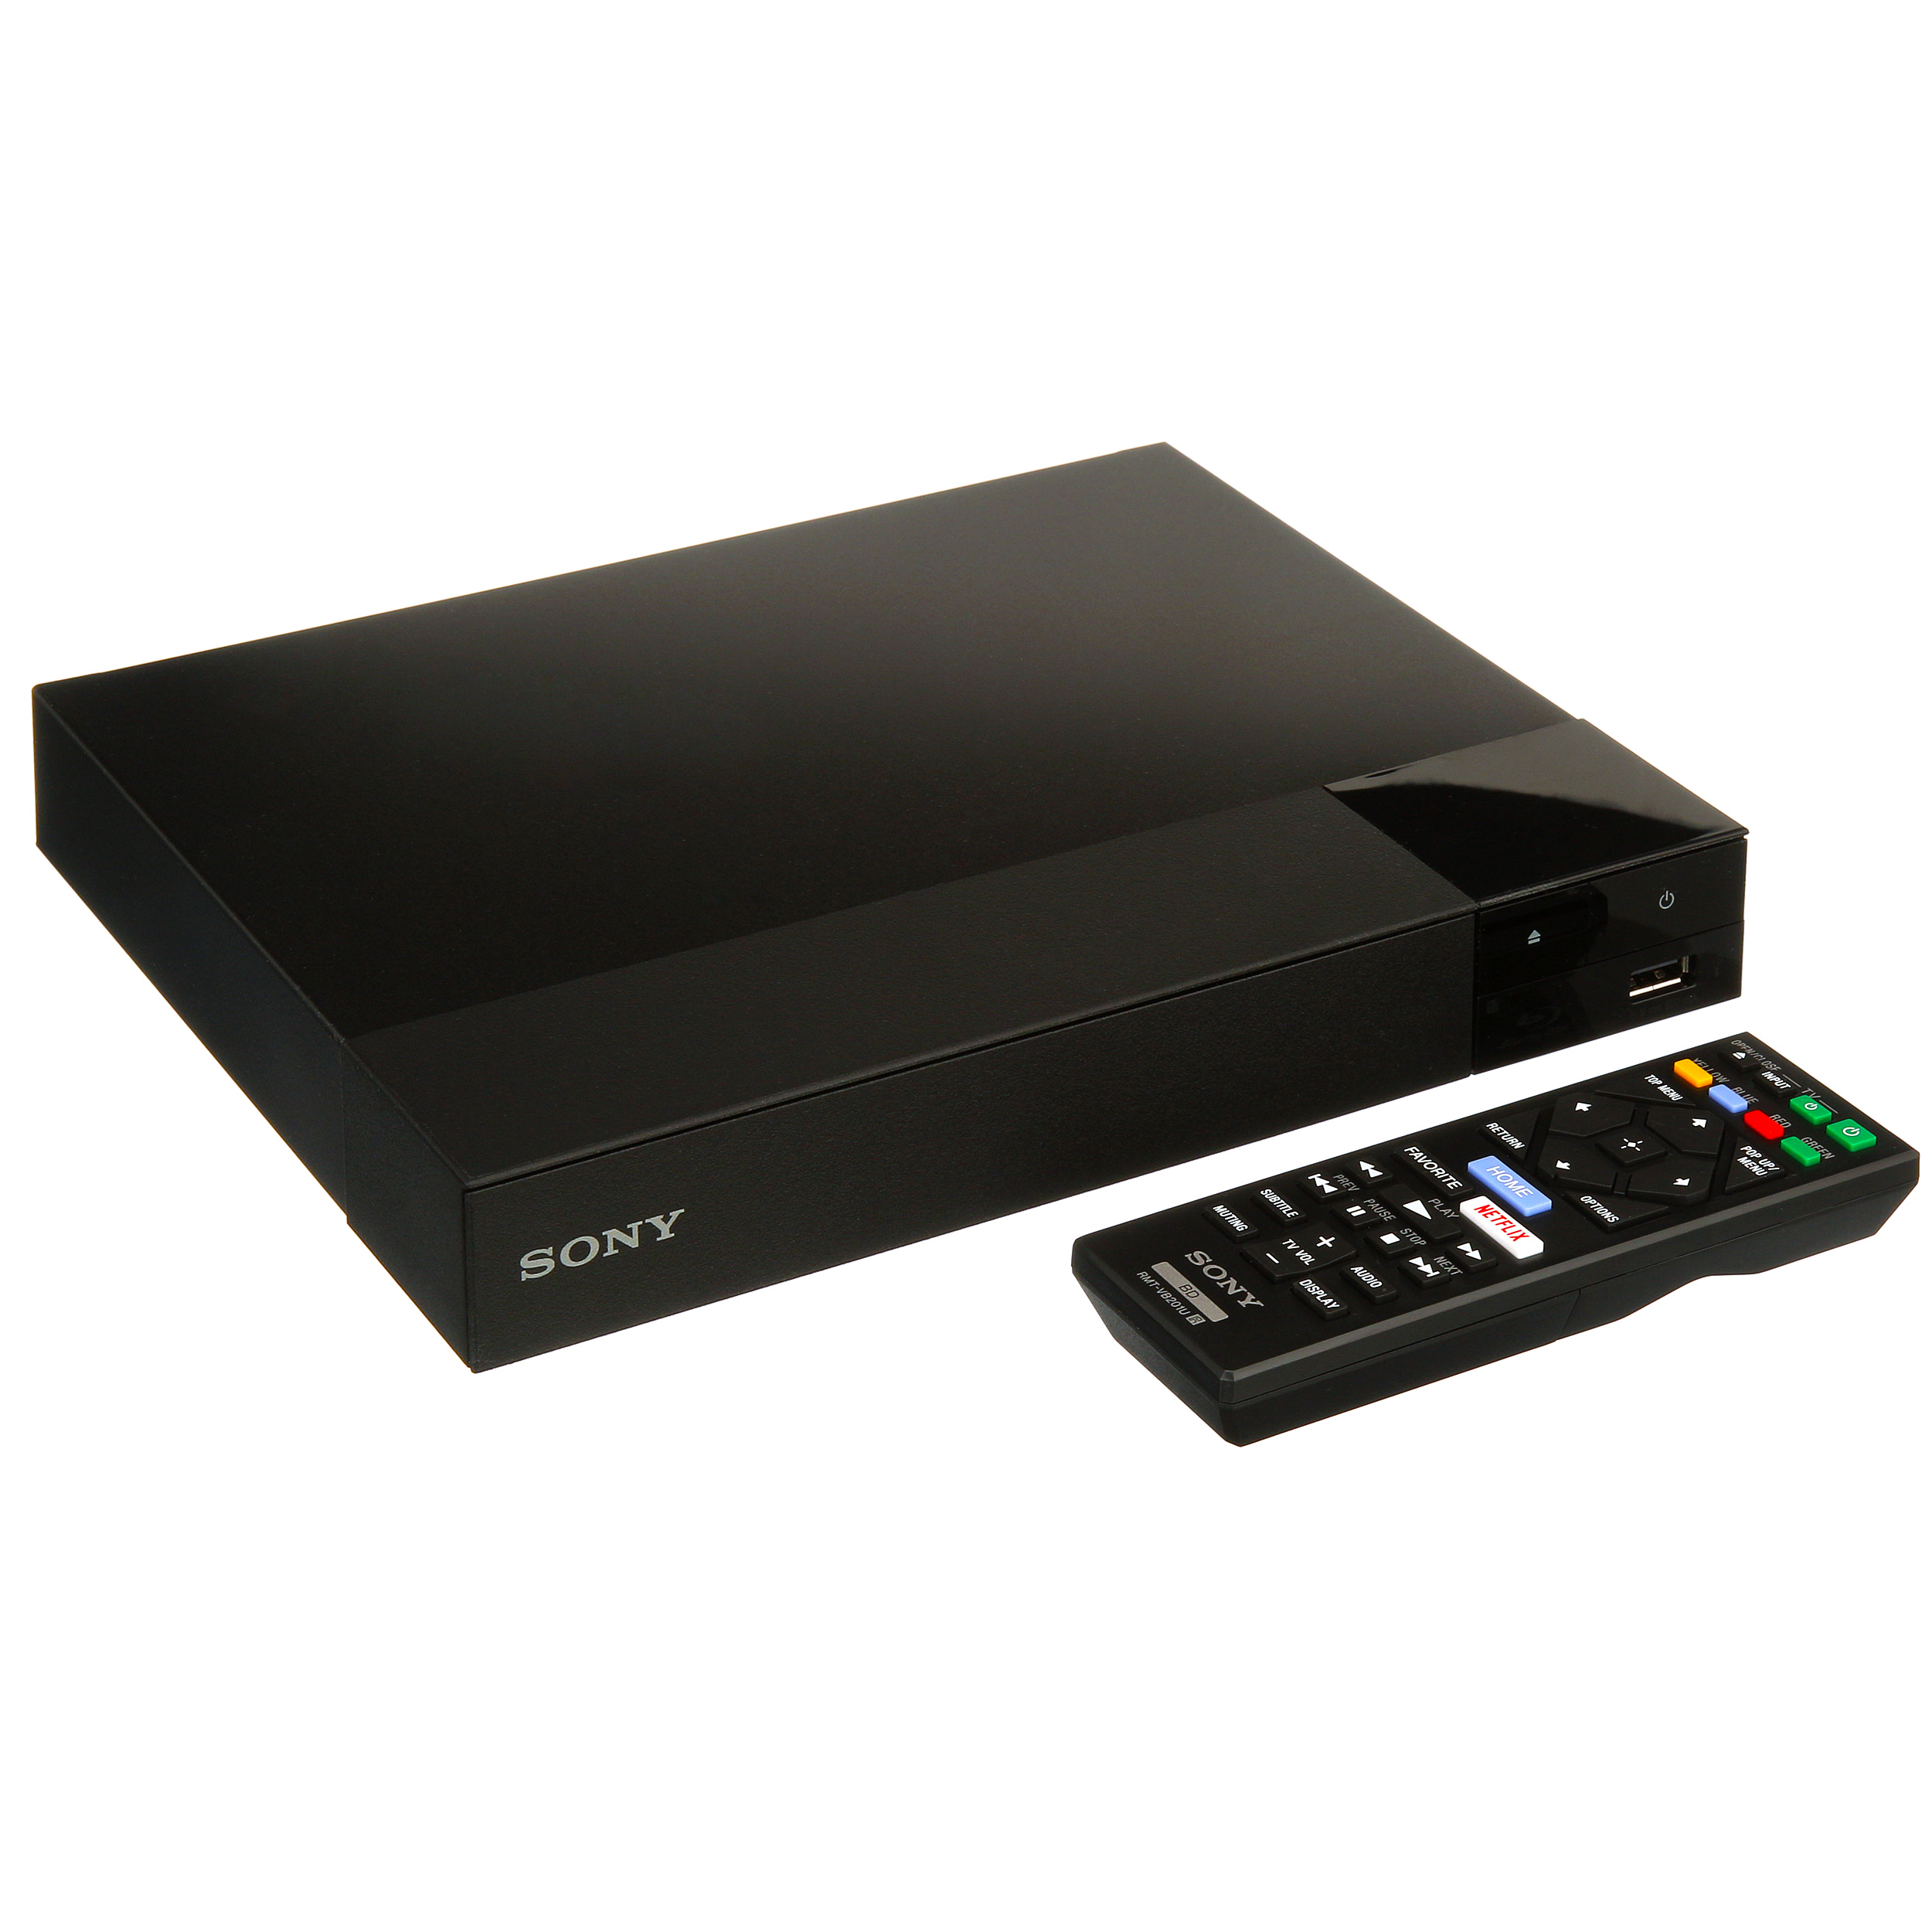 Sony BDP-S3700 Full HD Steaming Blu-ray DVD Player with built-in Wi-Fi, Dolby Digital TrueHD/DTS, and DVD upscaling - image 2 of 9